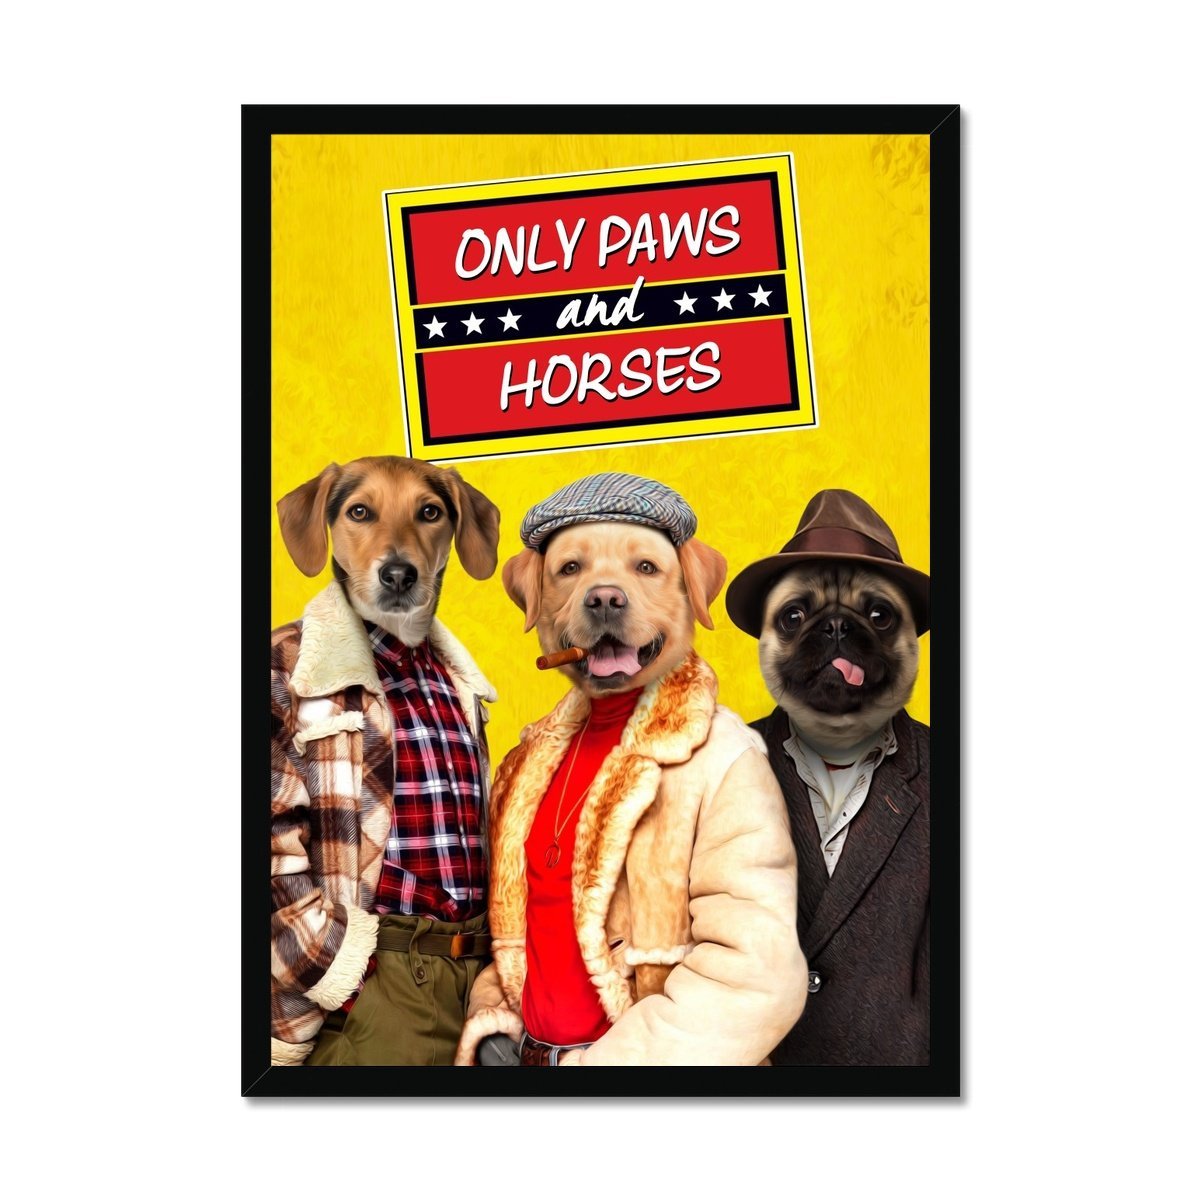 Only Paws and Horses: Custom Framed 3 Pet Portrait - Paw & Glory - #pet portraits# - #dog portraits# - #pet portraits uk#, sarahspetportraits, portraits of pets, dog oil painting, pet canvas, pet prints, pet portraits